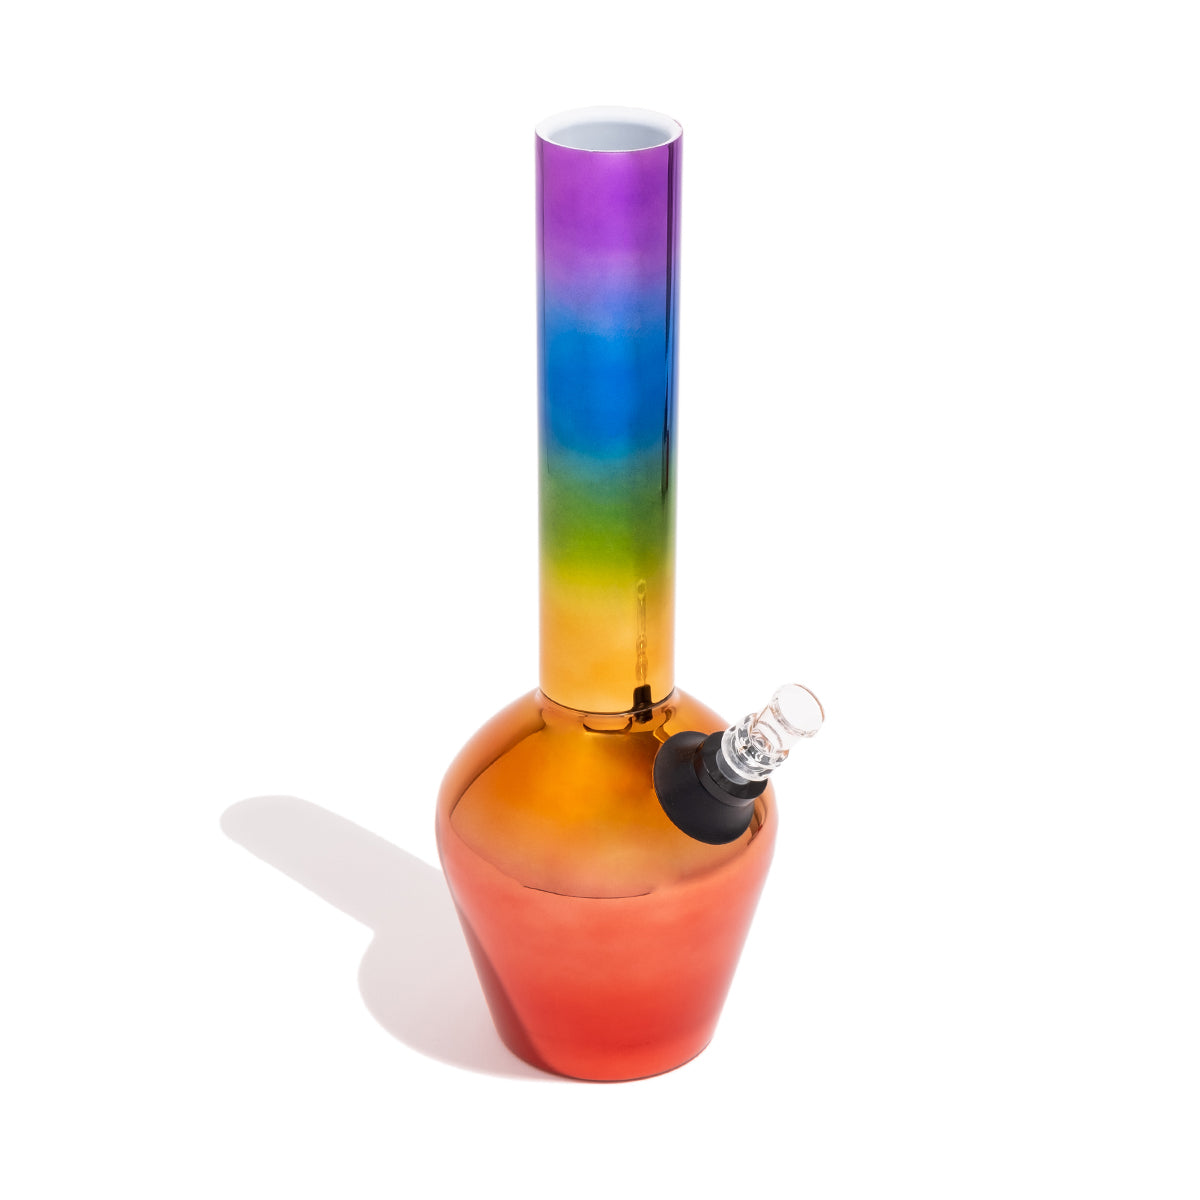 rainbow weed pipes